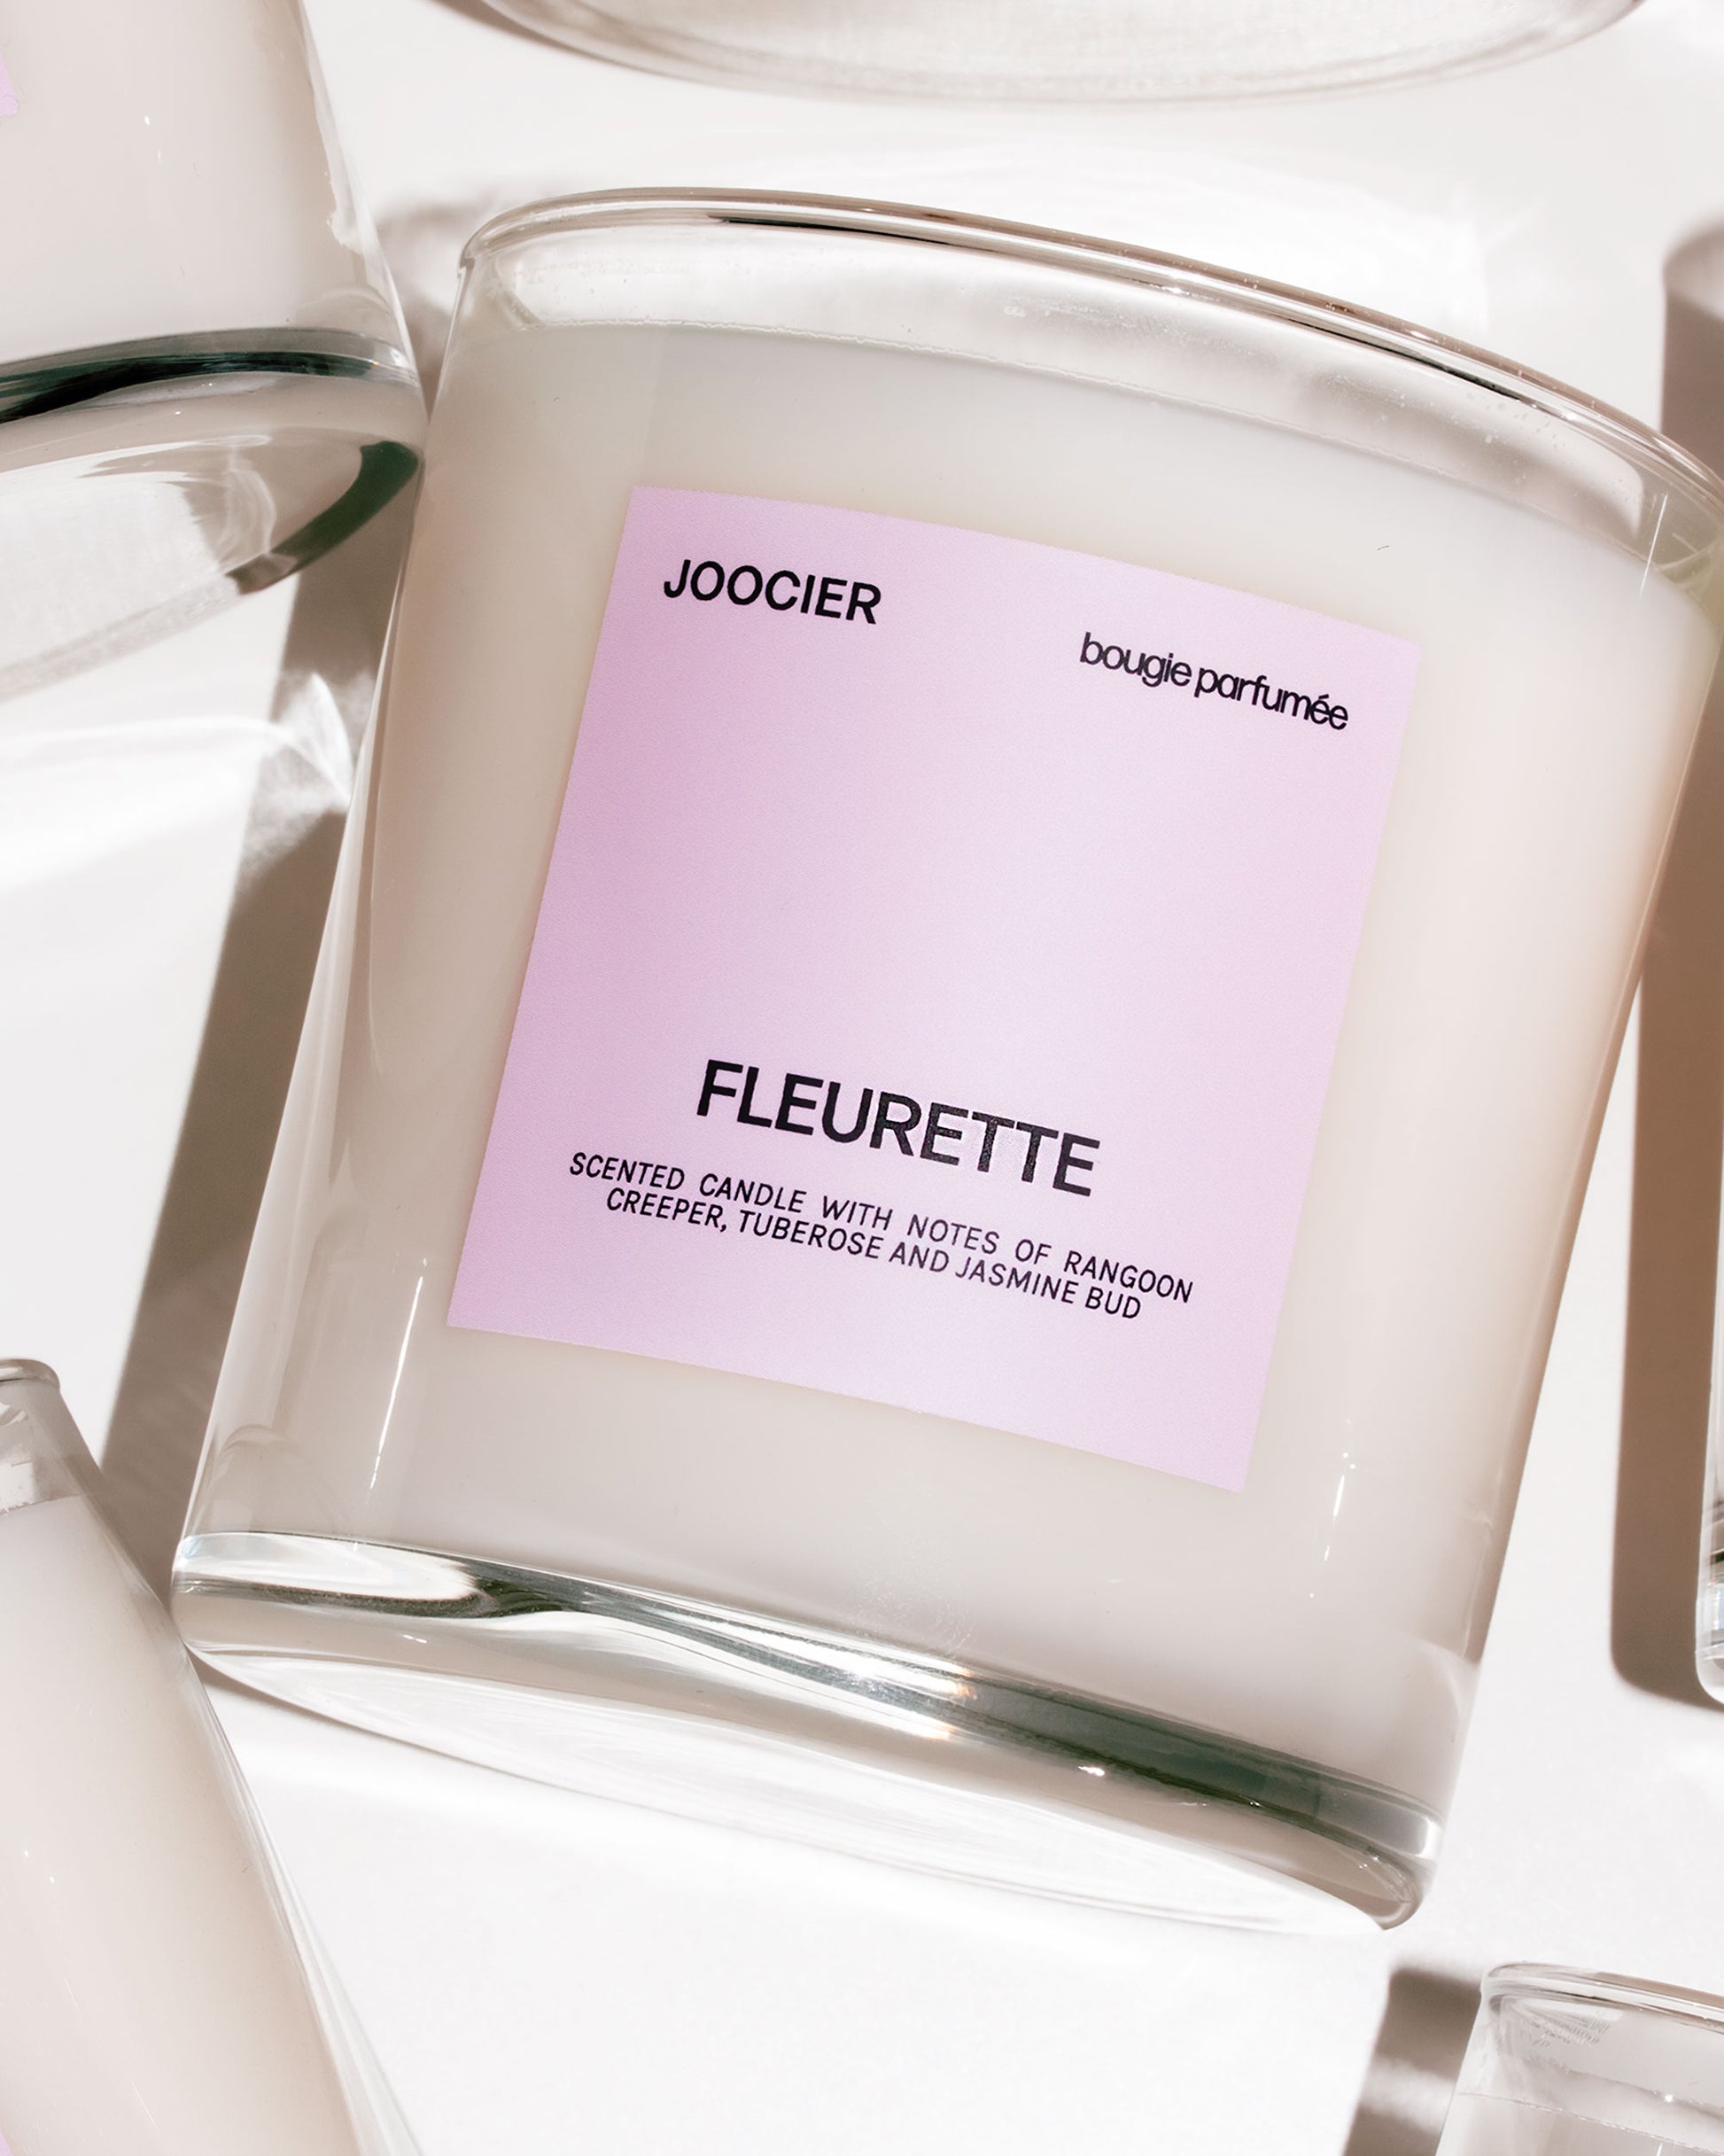 Candle inspired by Gucci Bloom perfume